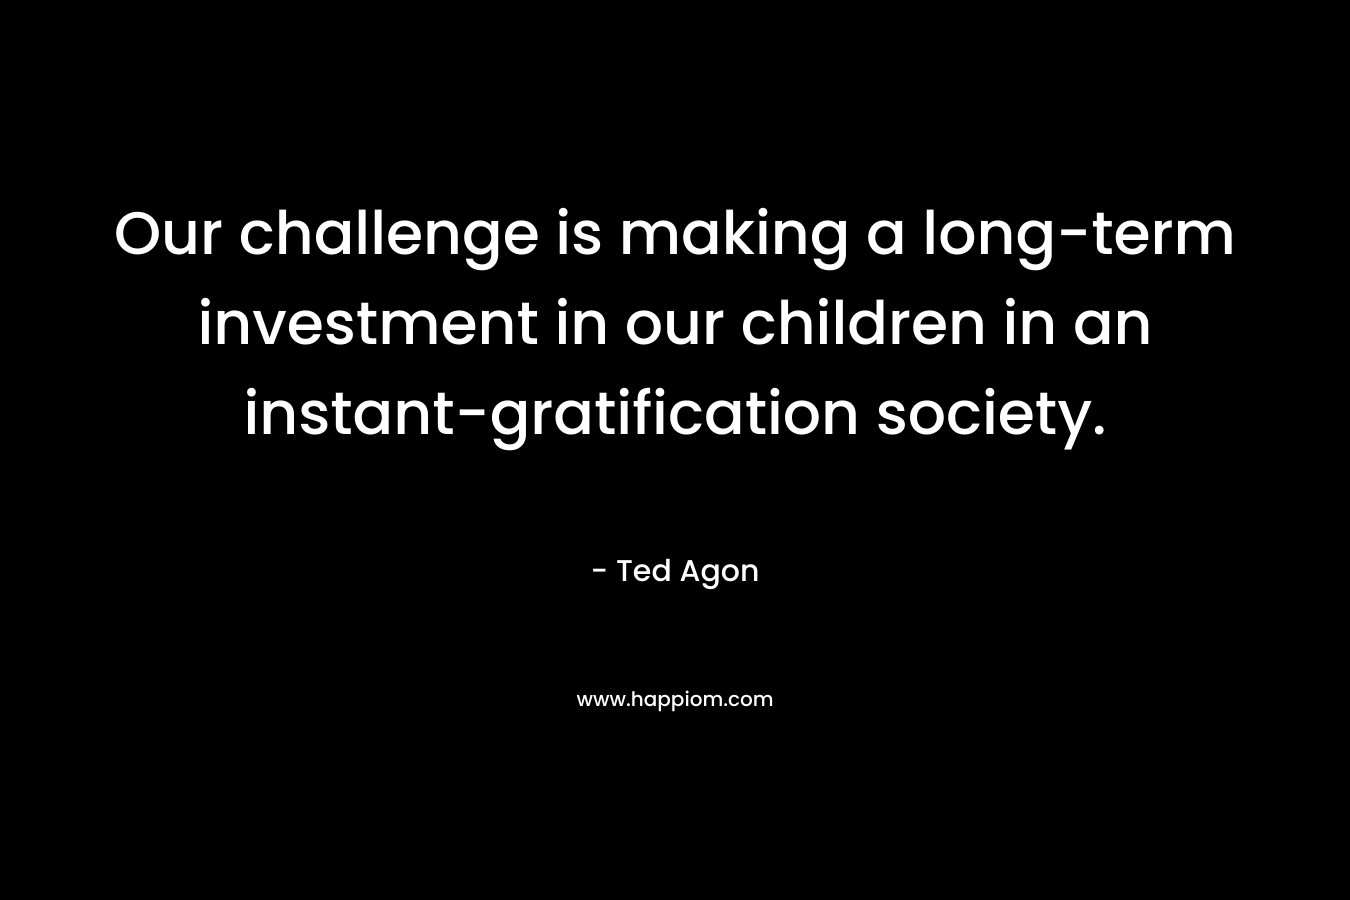 Our challenge is making a long-term investment in our children in an instant-gratification society. – Ted Agon